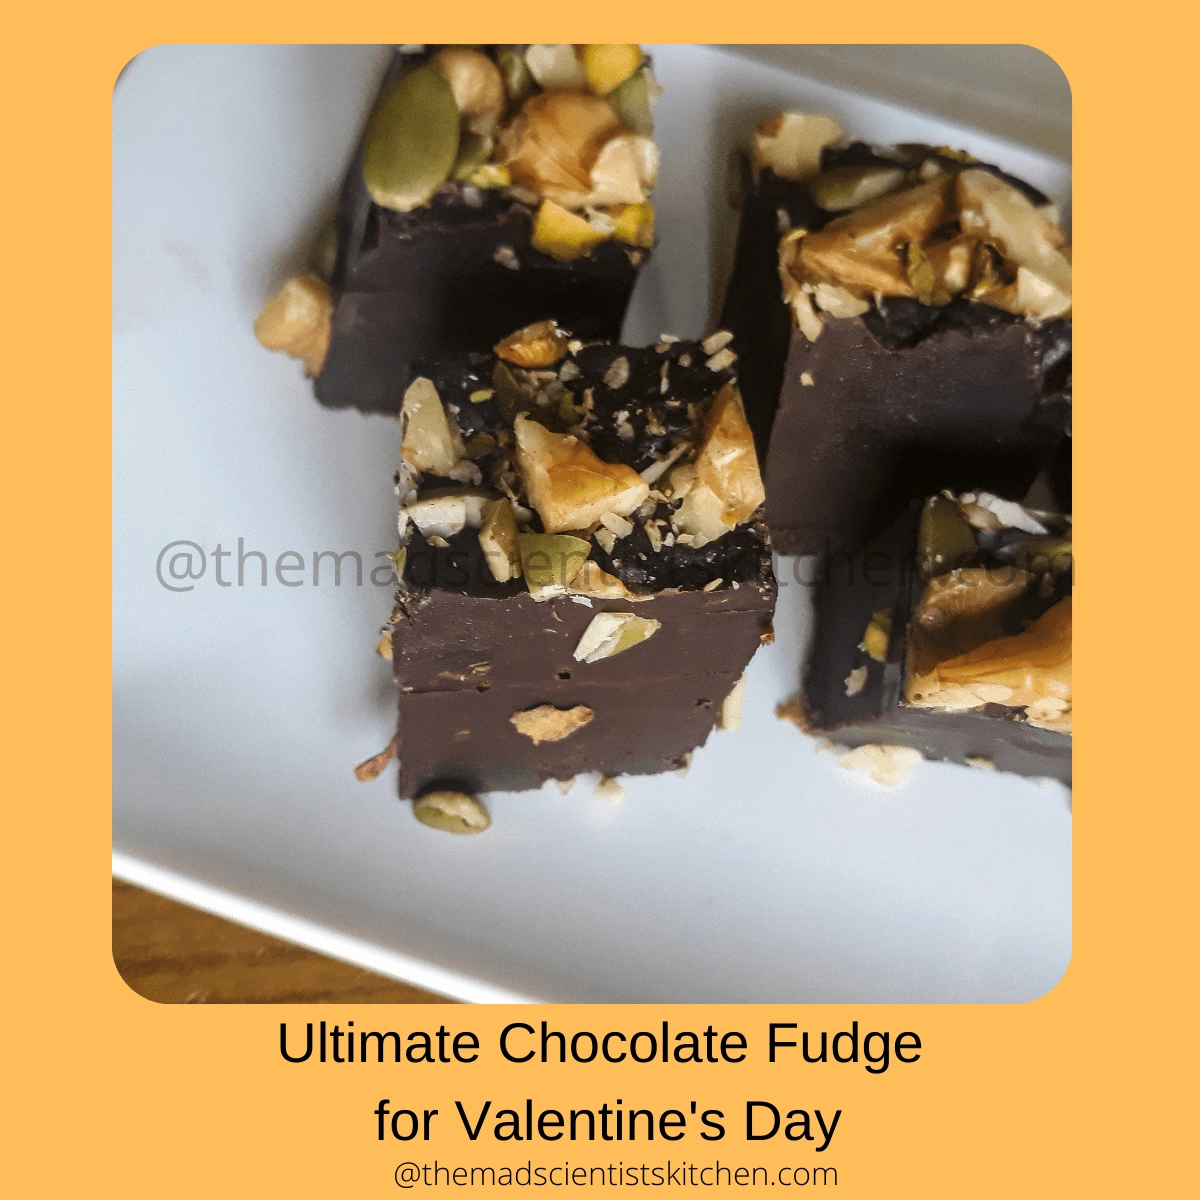 Make some Chocolate Fudge as a gift for Valentine